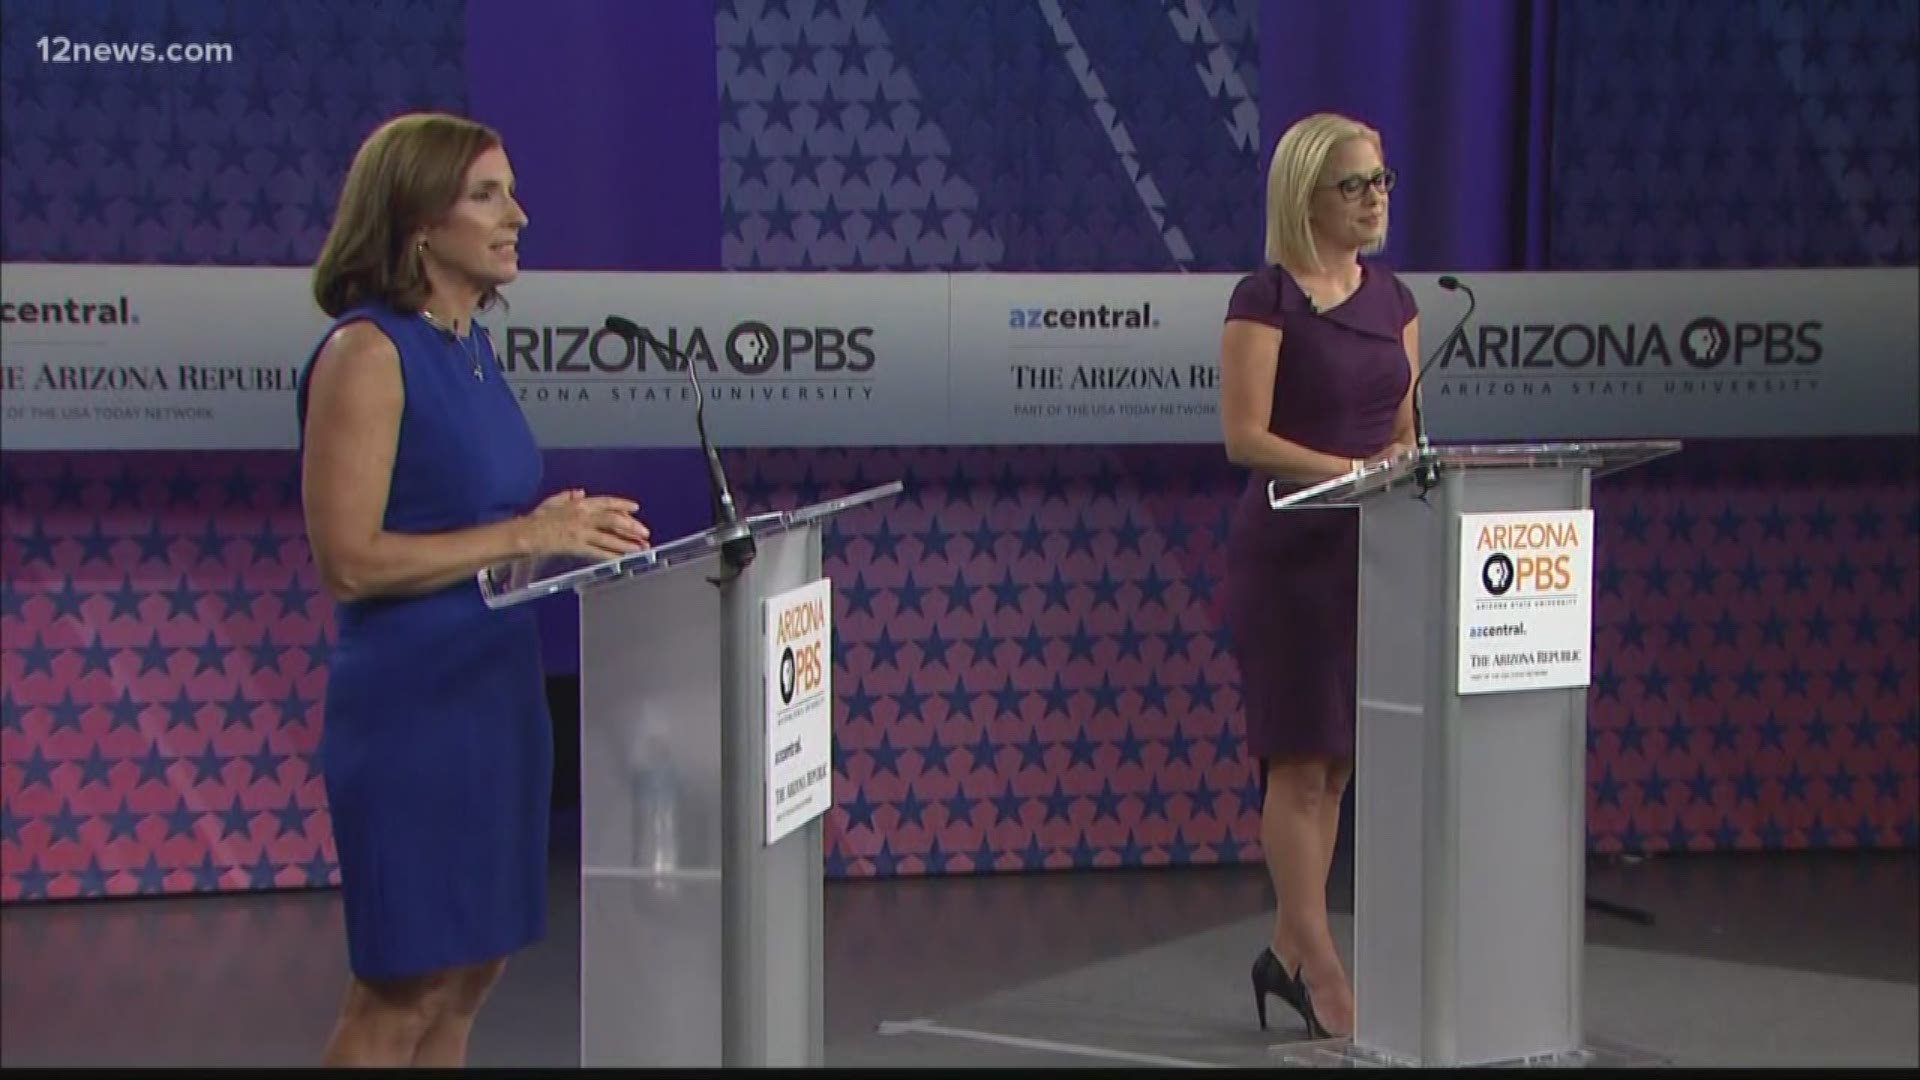 Martha McSally and Kyrsten Sinema went head to head in a heated debate to become the next U.S. Senator for the state of Arizona. We breakdown the most memorable moments of the lively debate.